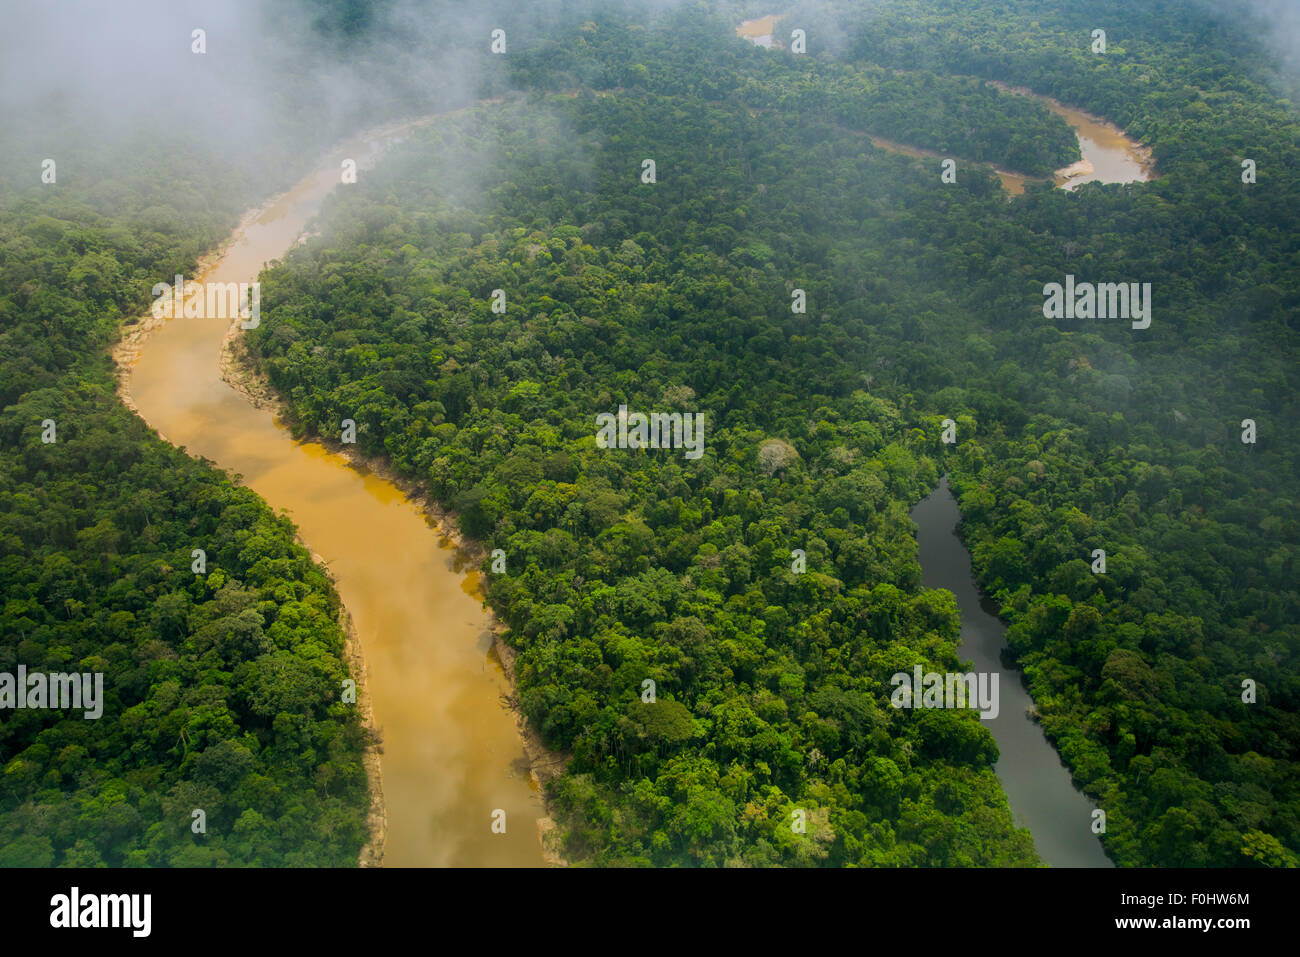 Amazon Rainforest aerial. Primary forest, Yavari Miri River and oxbow lake, between Iquitos, Peru and Brazilian border Stock Photo